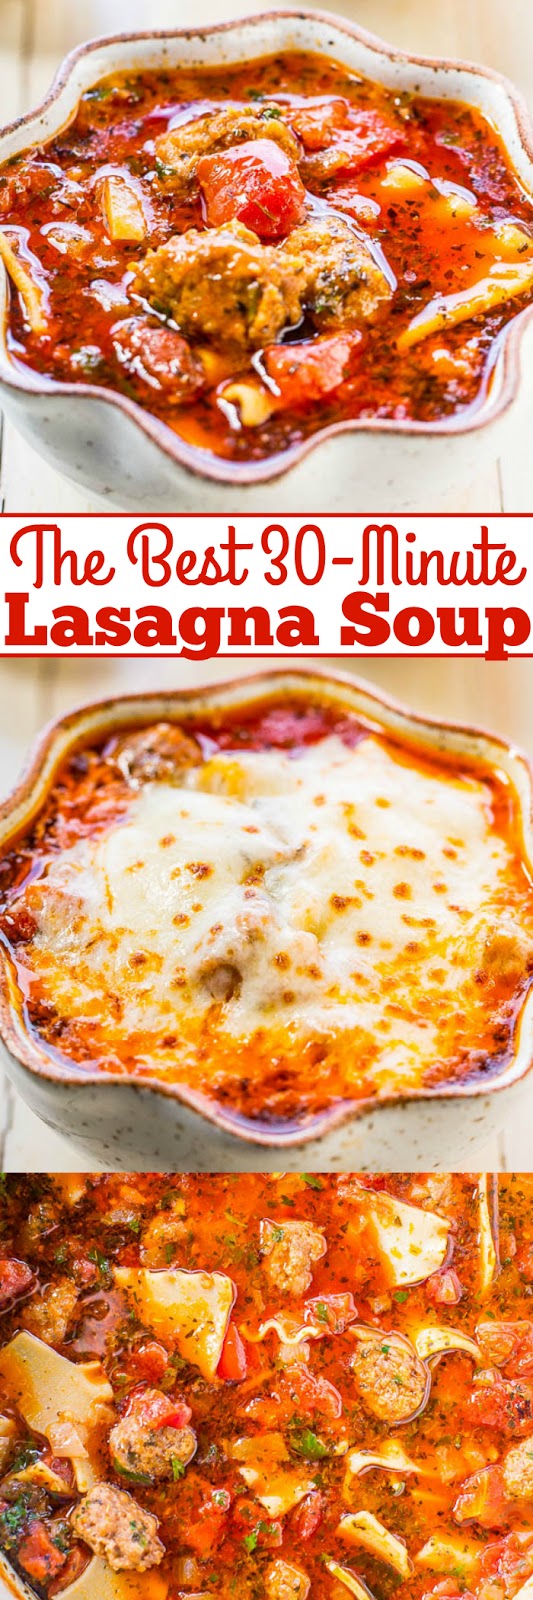 The Best 30-Minute Lasagna Soup Recipe - Girls Dishes